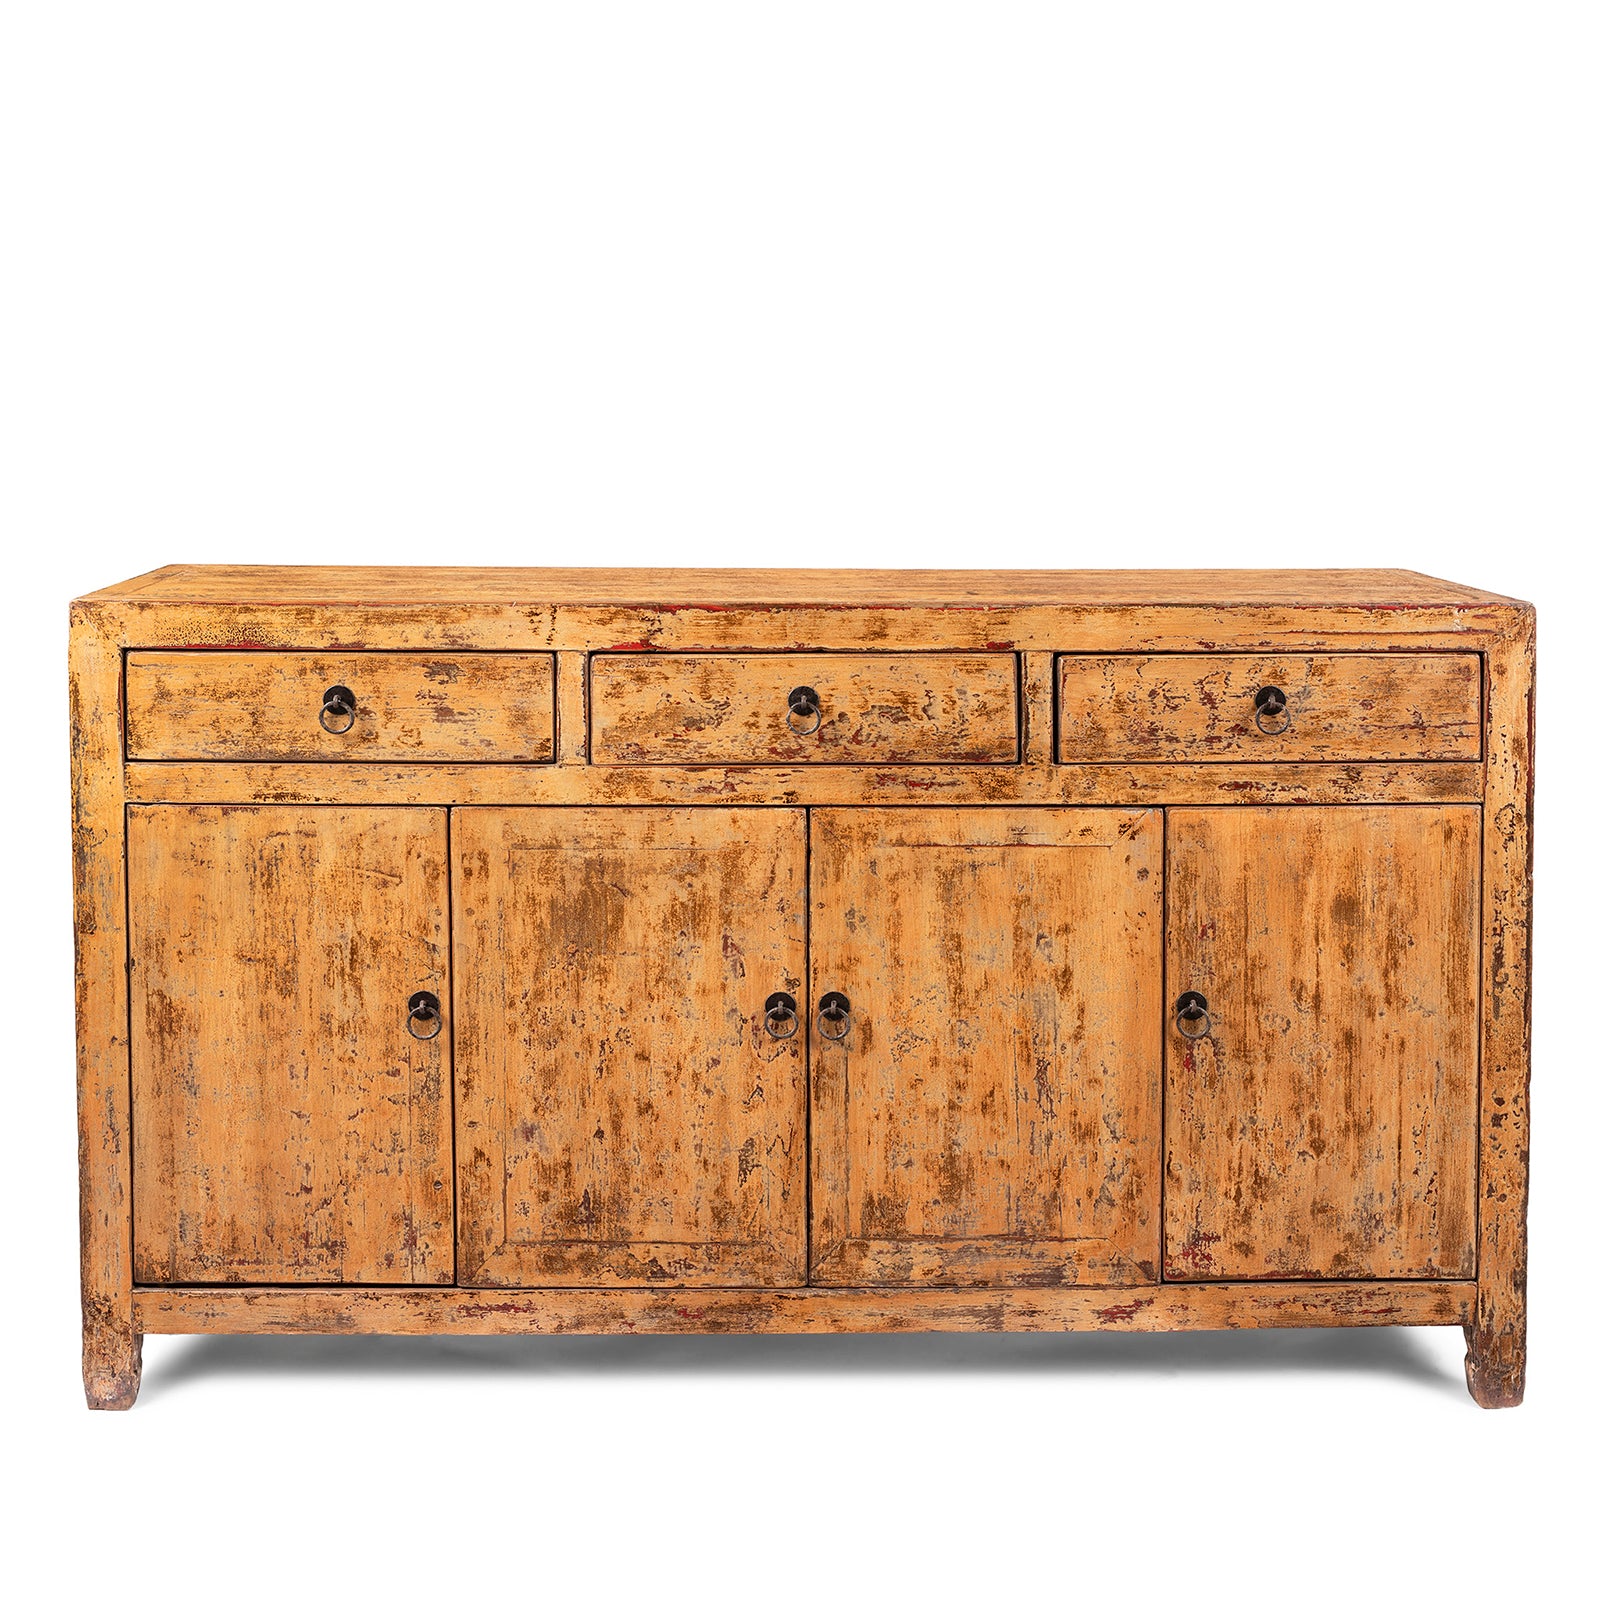 Chinese Yellow Lacquer Sideboard Made From Reclaimed Wood | Indigo Antiques